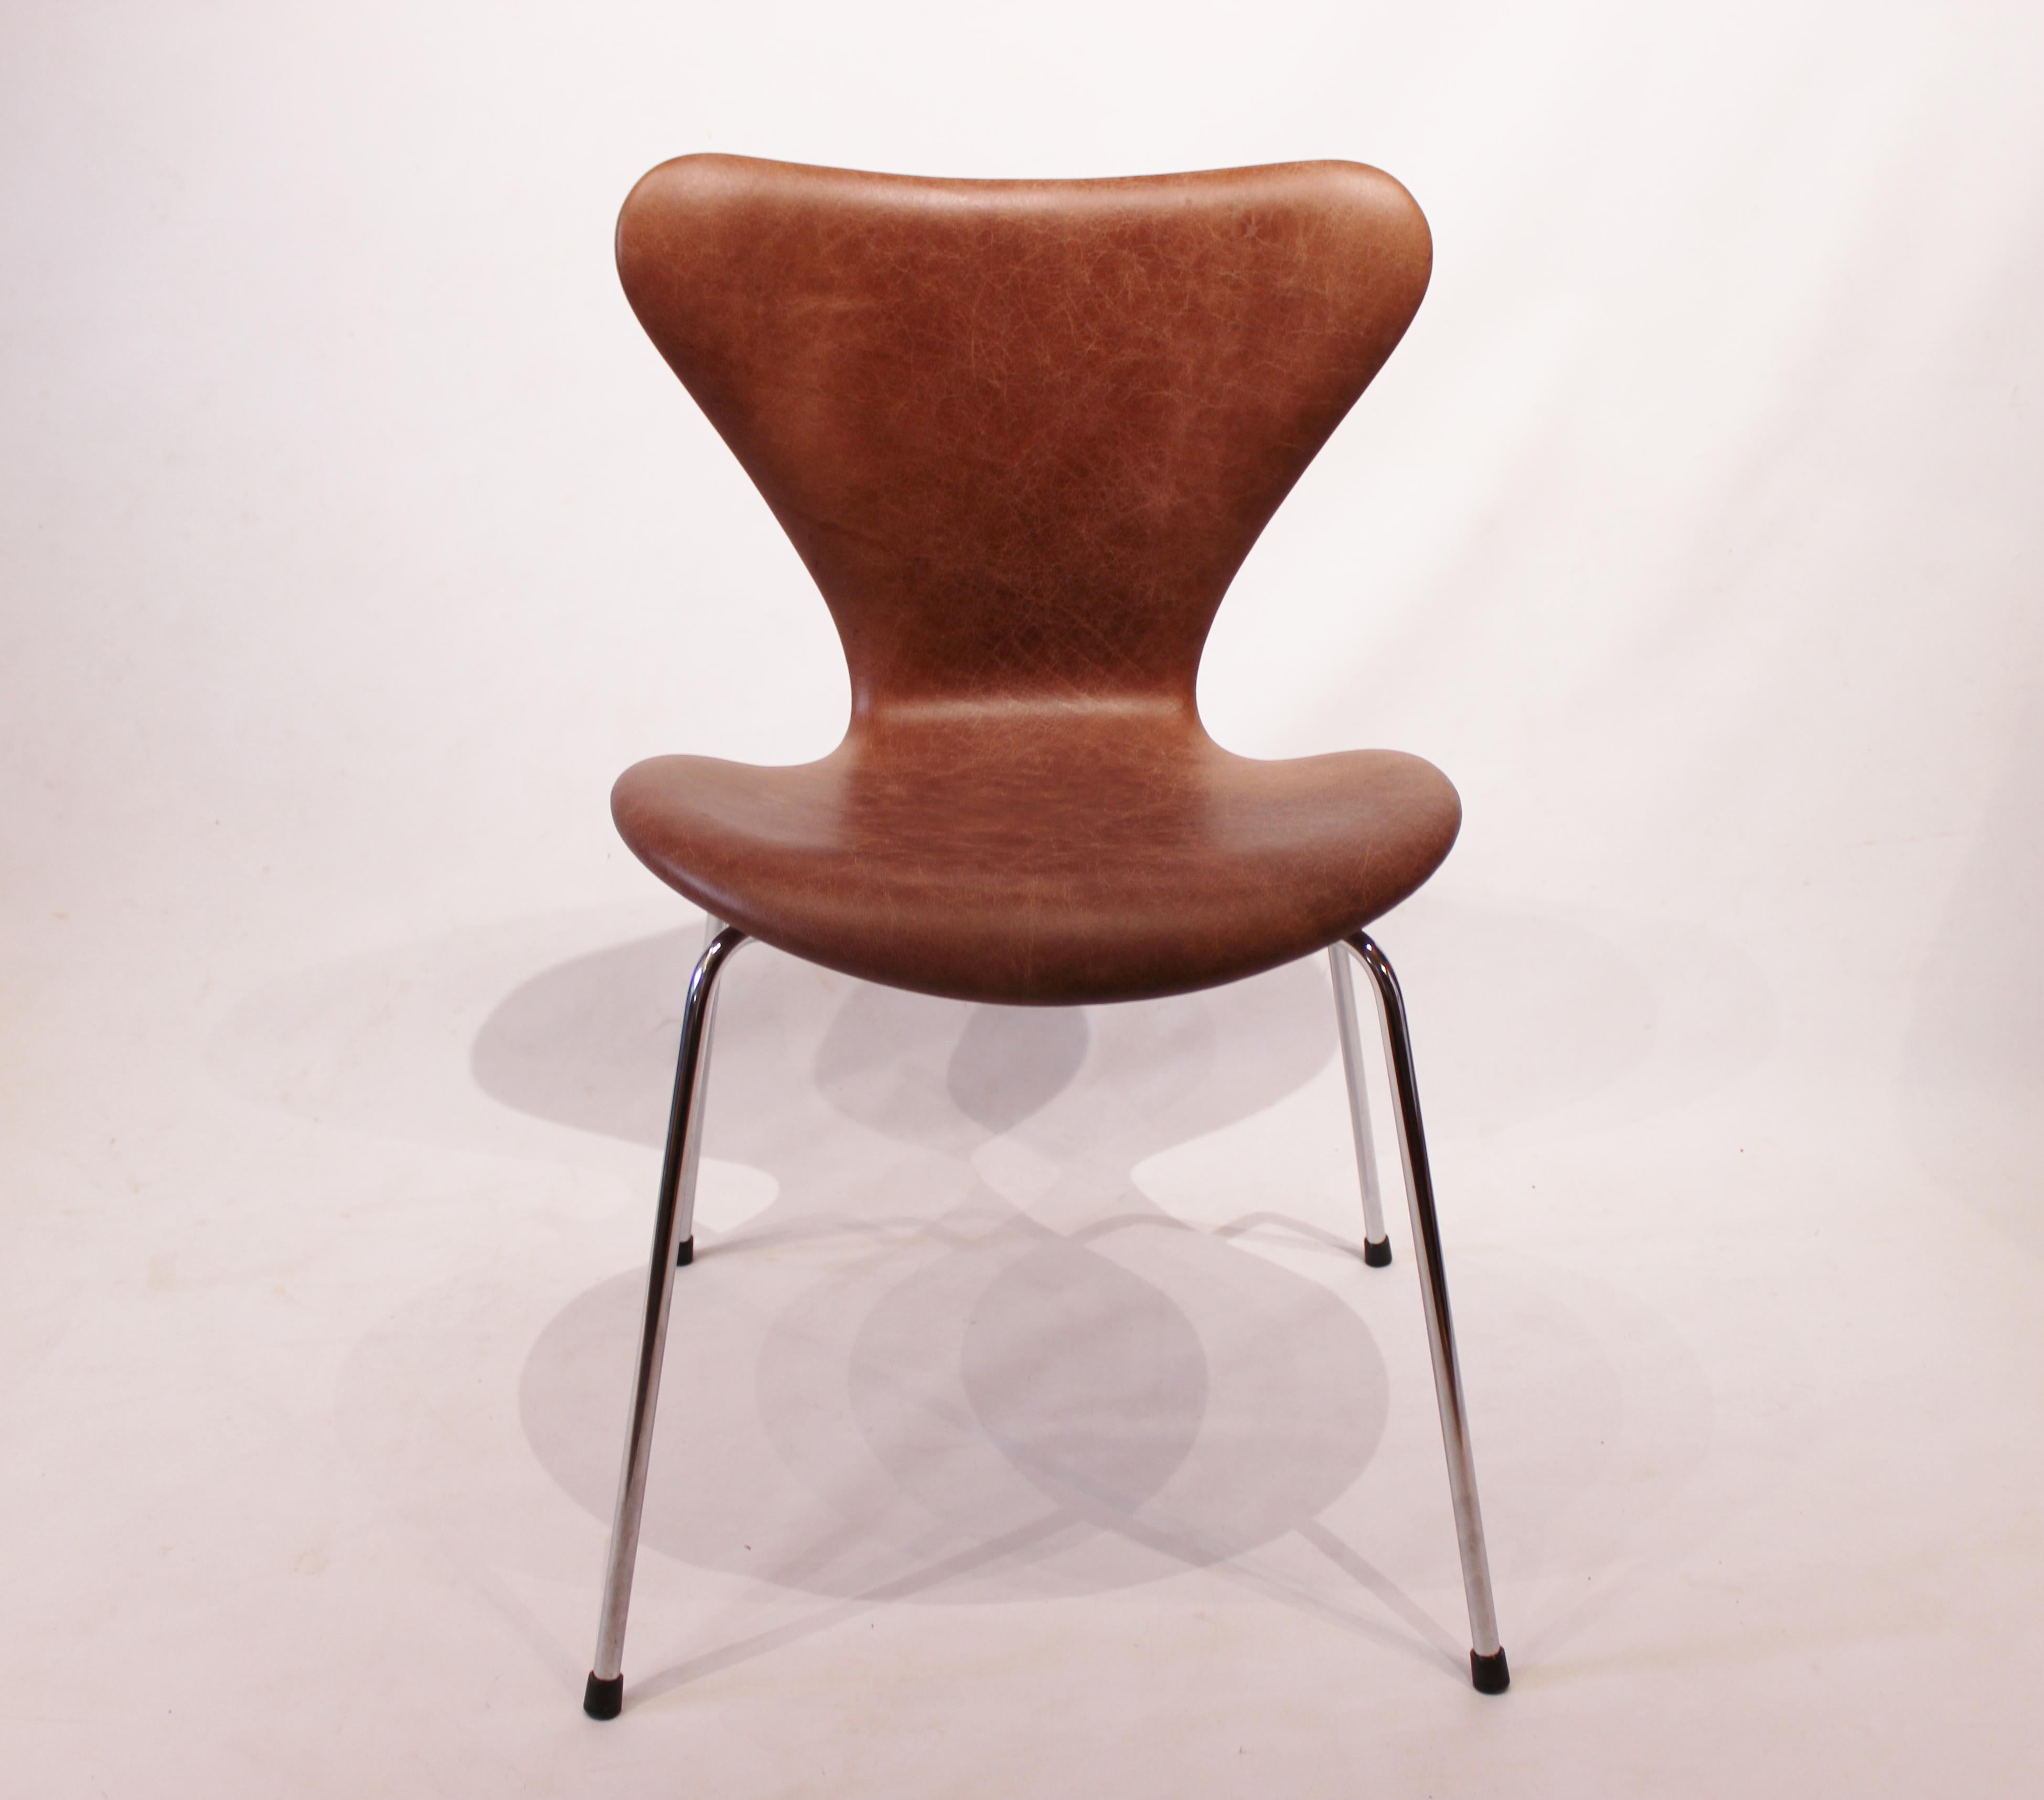 A set of 6 seven chairs, model 3107, designed by Arne Jacobsen in 1955 and manufactured by Fritz Hansen in the 1980s. The chairs are newly upholstered in cognac patinated leather and are therefore in great condition. The chairs works perfectly with